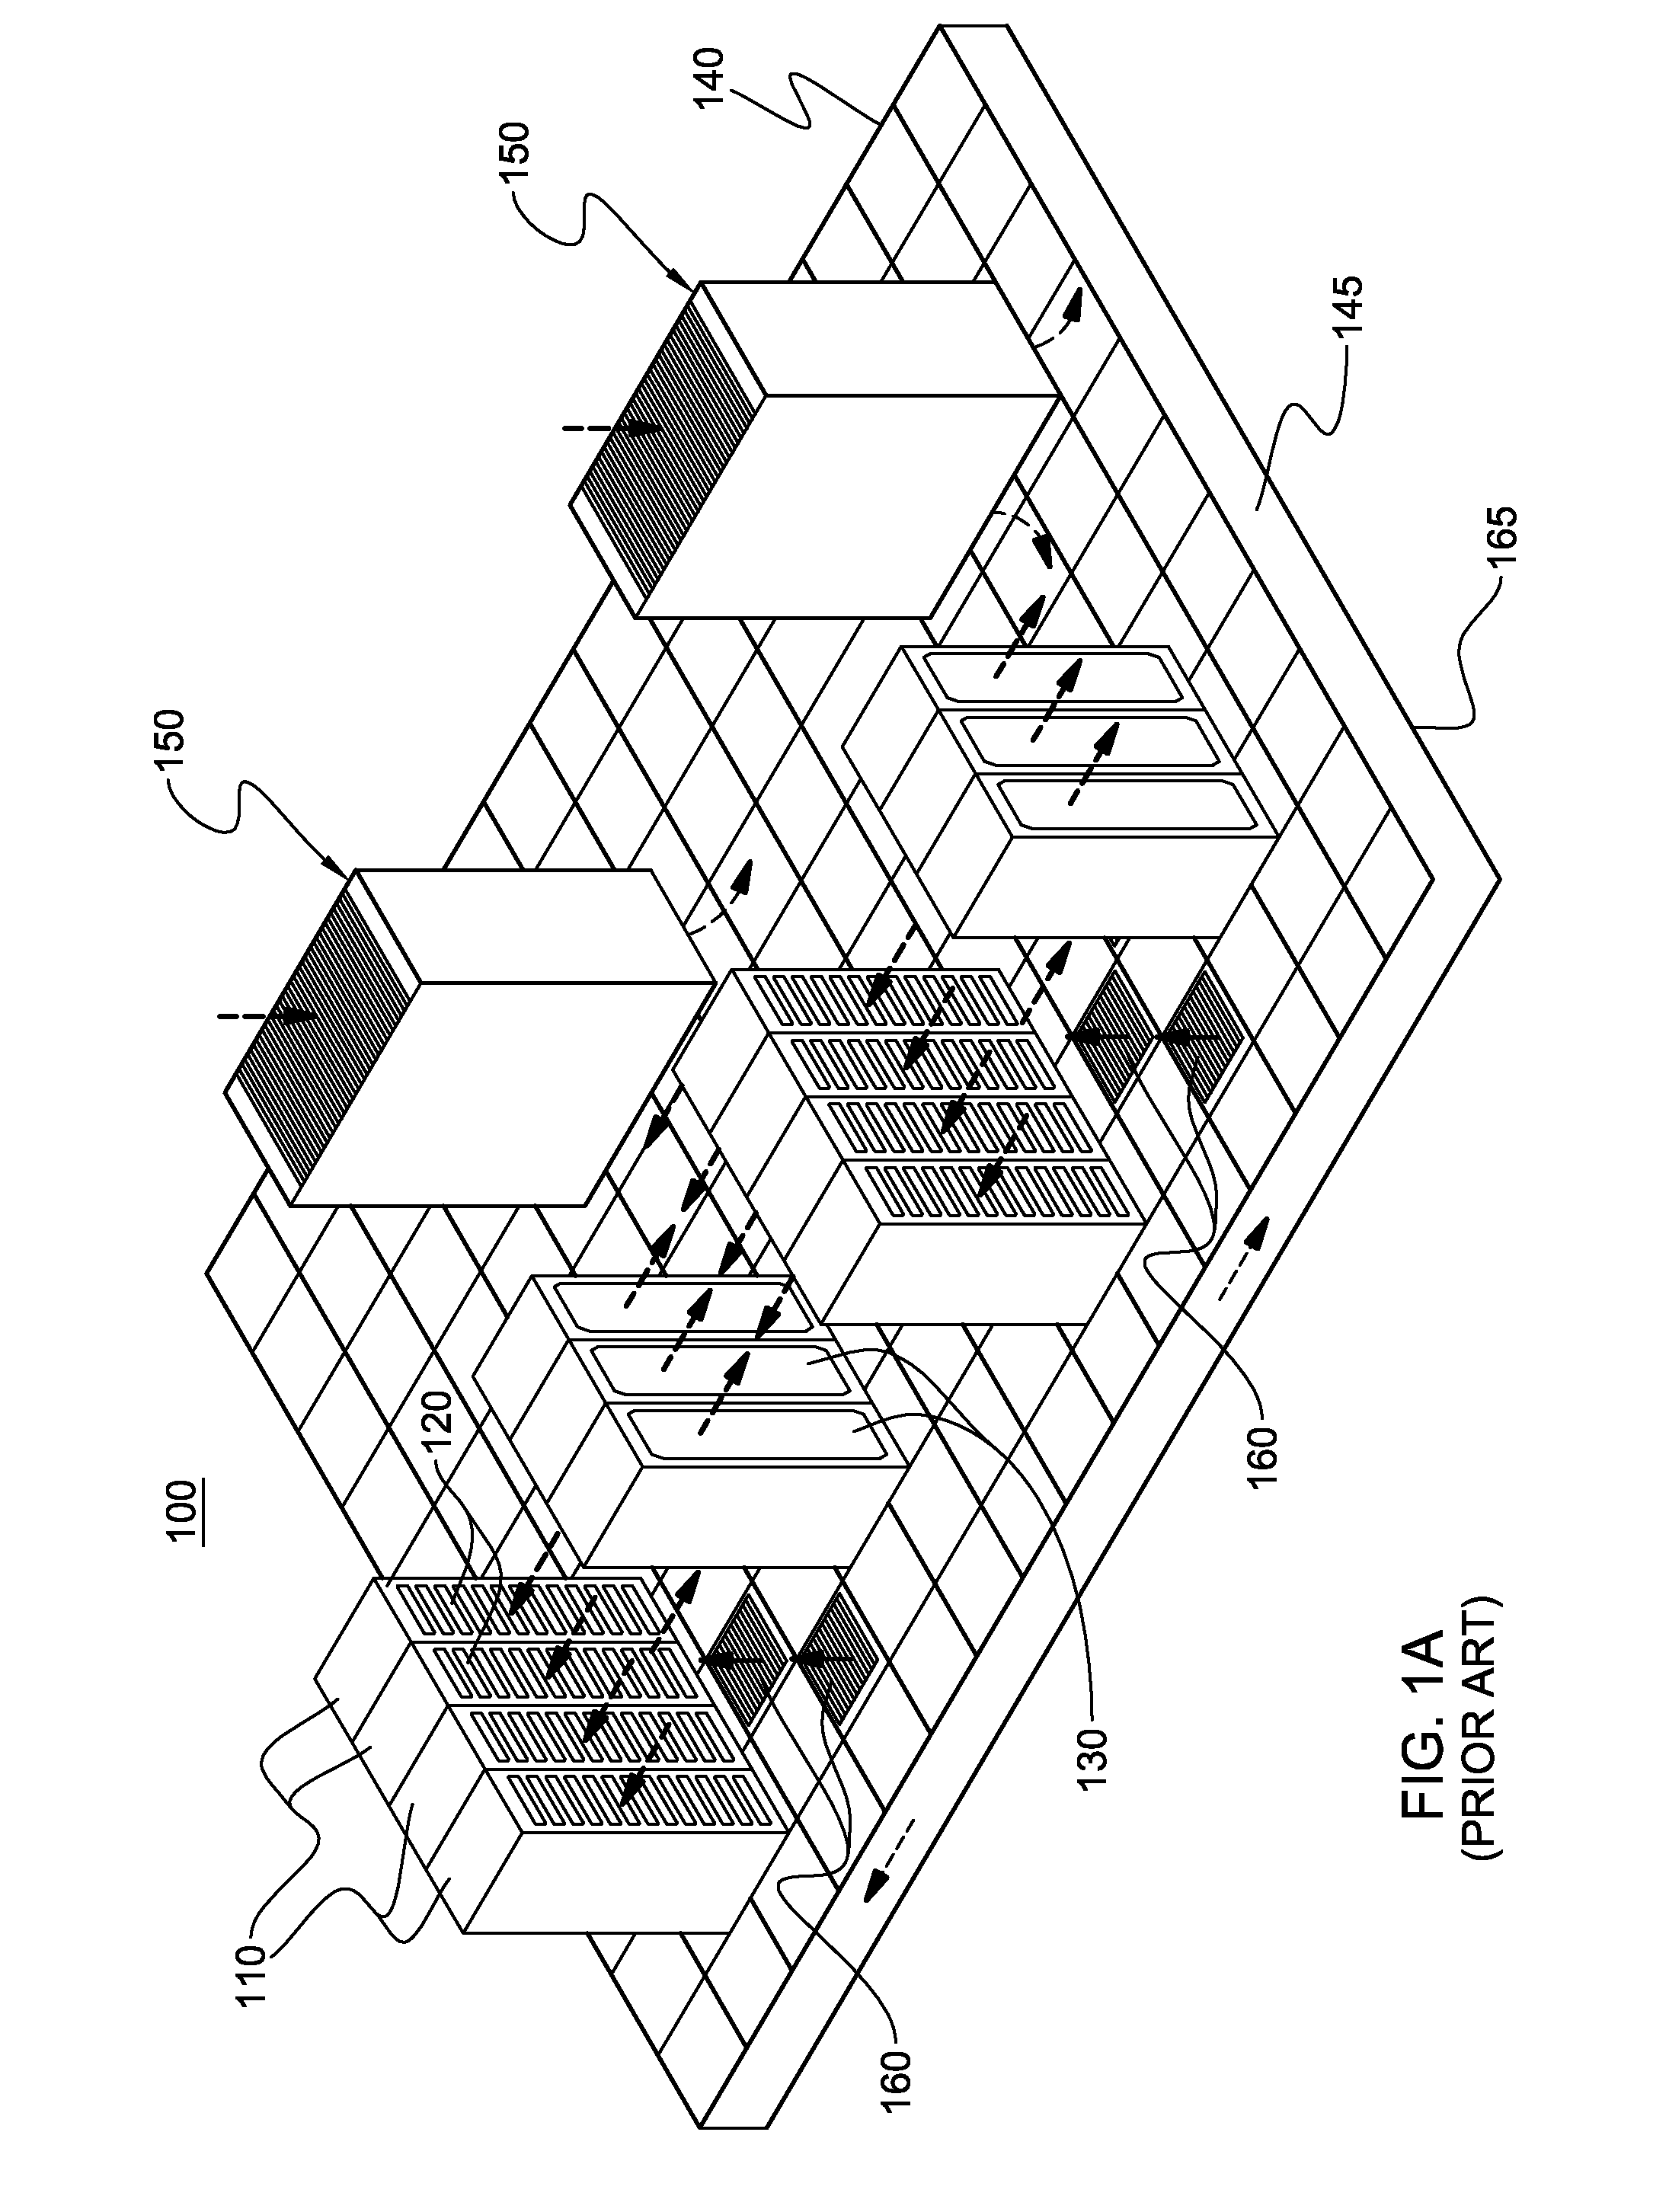 Vapor-compression heat exchange system with evaporator coil mounted to outlet door cover of an electronics rack